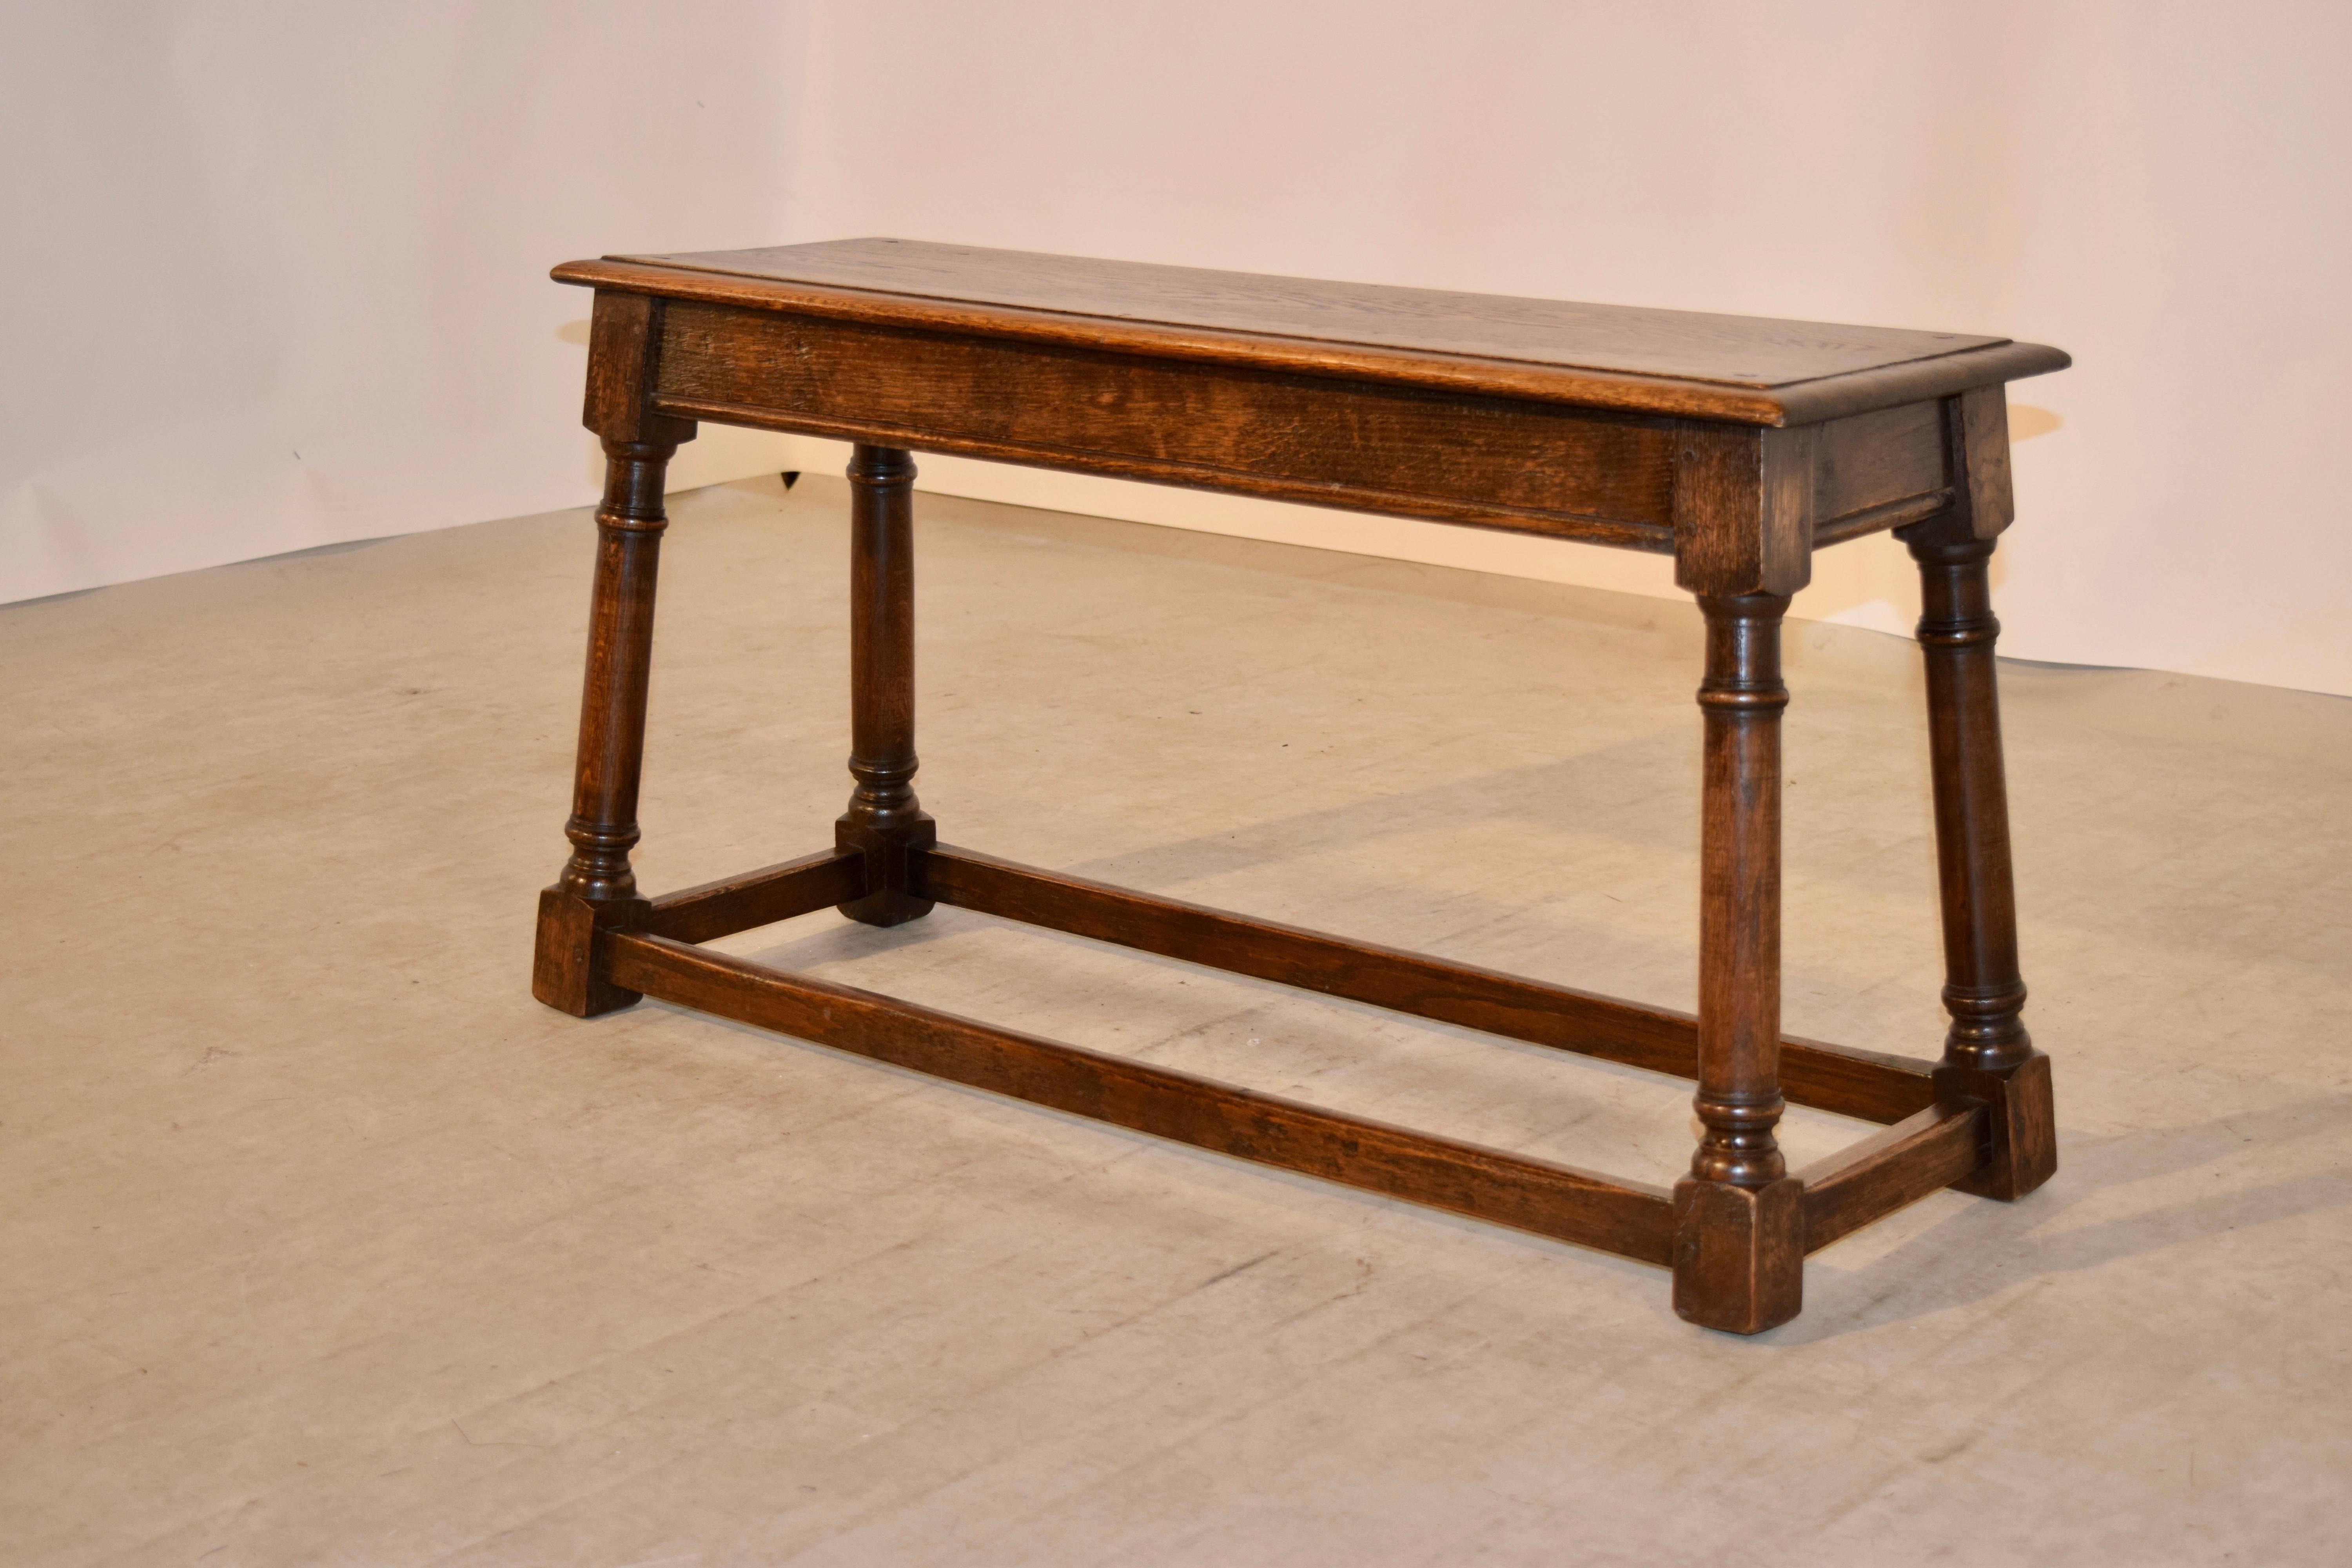 19th Century oak bench from England with a beveled edge around the top, following down to a simple apron and supported on hand turned splayed legs joined by stretchers.  The seat measures 36 w x 11.75 d.